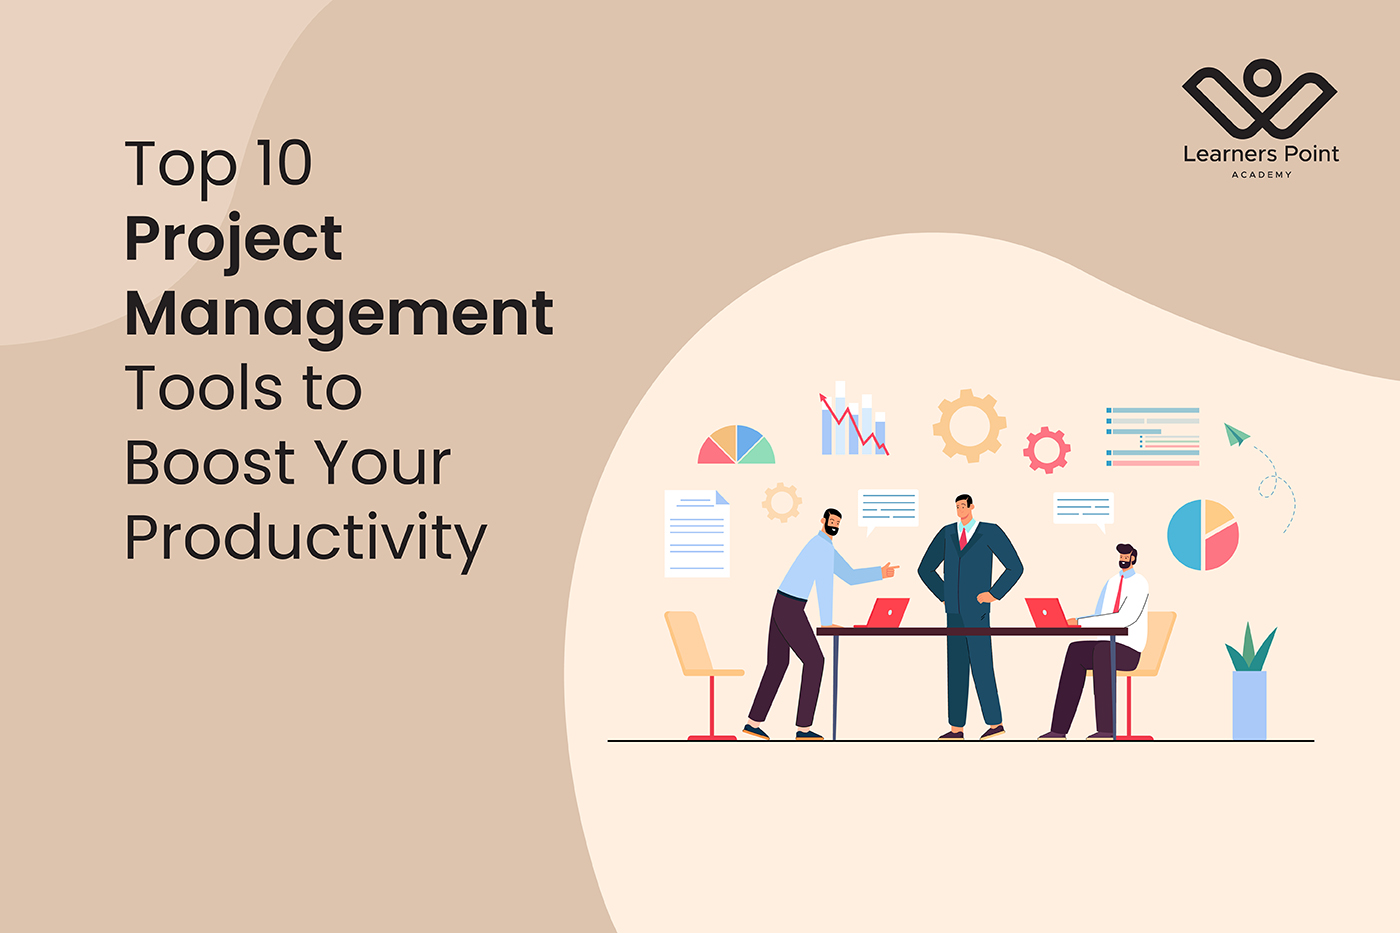 Top 10 Project Management Tools to Boost Your Productivity